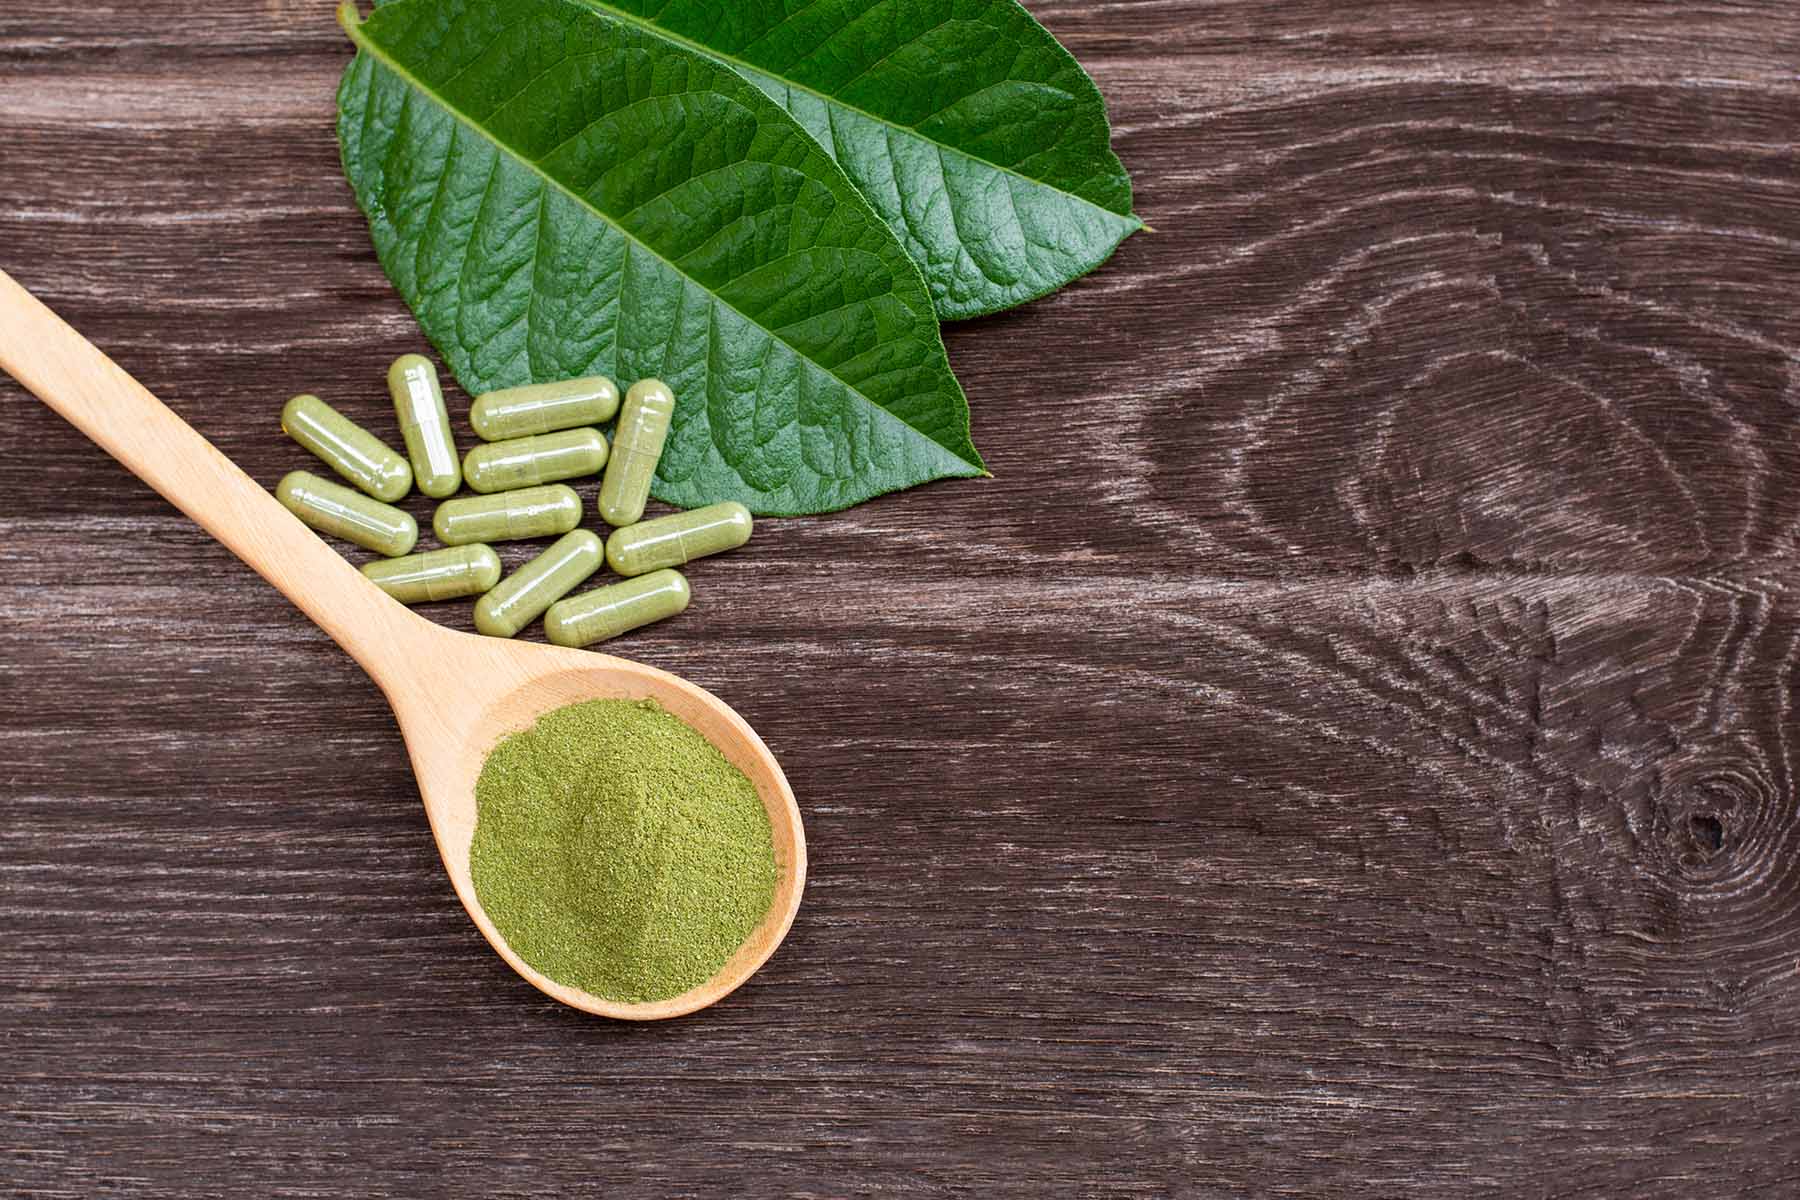 Kratom supplements and powder on a wooden backdrop